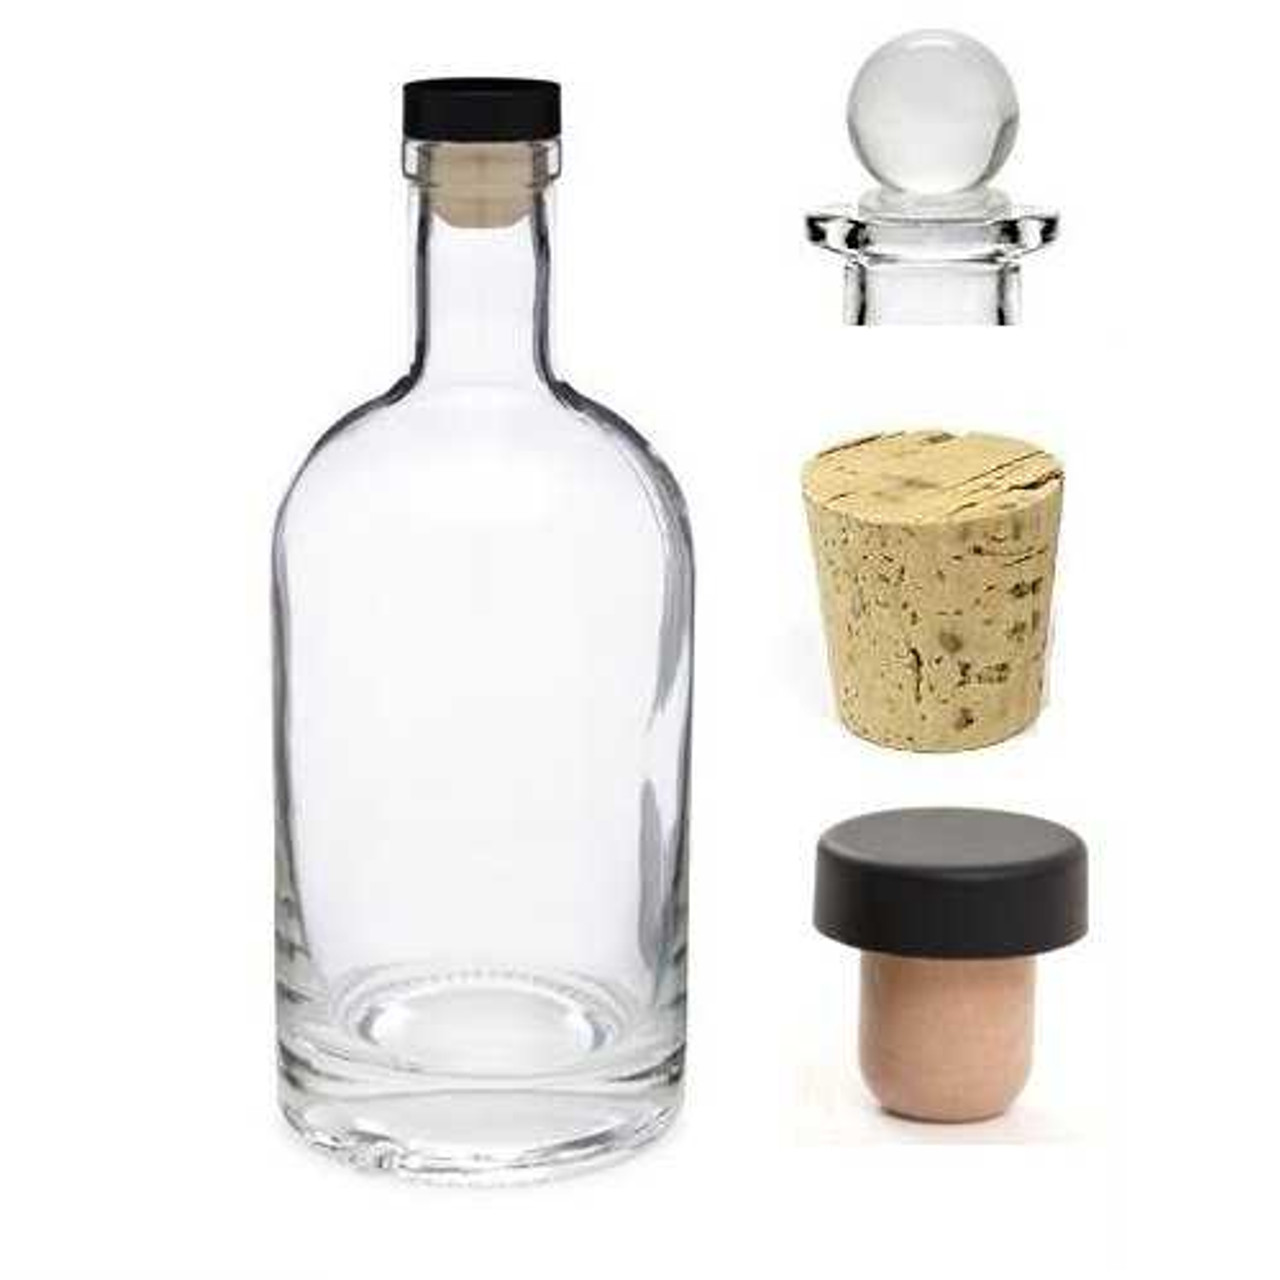 https://cdn11.bigcommerce.com/s-1ybtx/images/stencil/1280x1280/products/732/5911/12-oz-Heavy-Bottom-Nordic-Liquor-Bottle-with-Cork-T-bar-and-Glass-Stopper_2175__93273.1699988328.jpg?c=2?imbypass=on